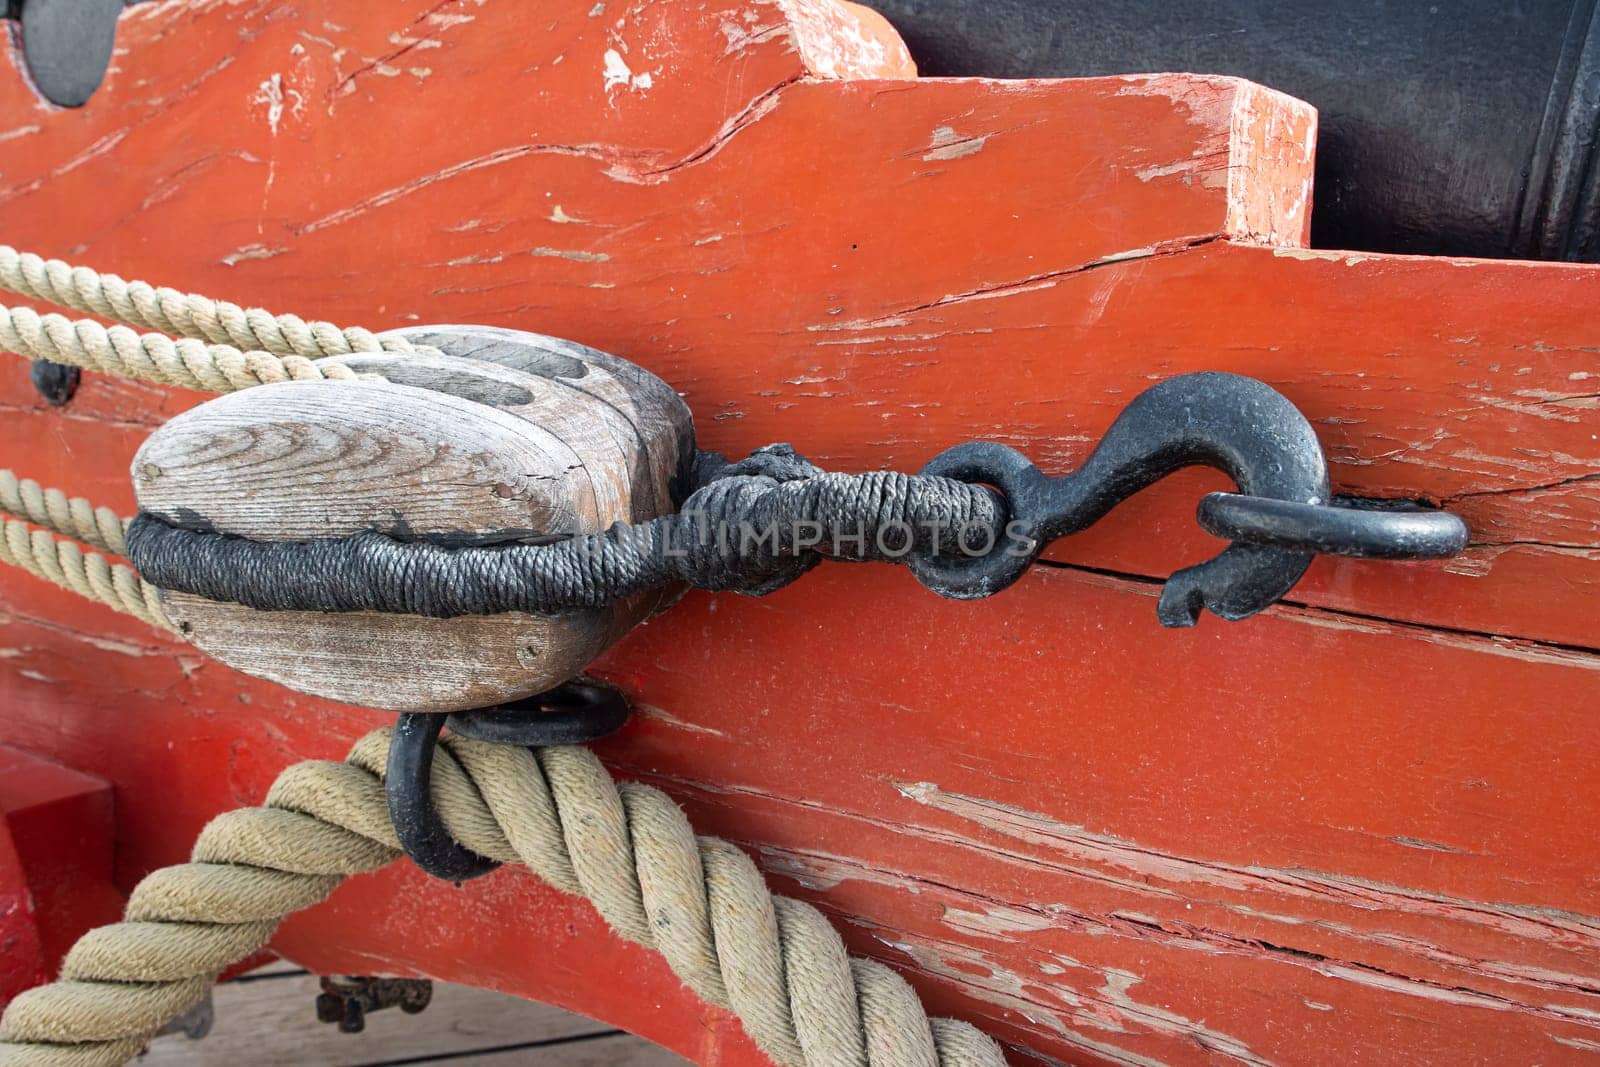 Ship's metal tackle on the deck of battle ship - military historical vessel, daylight